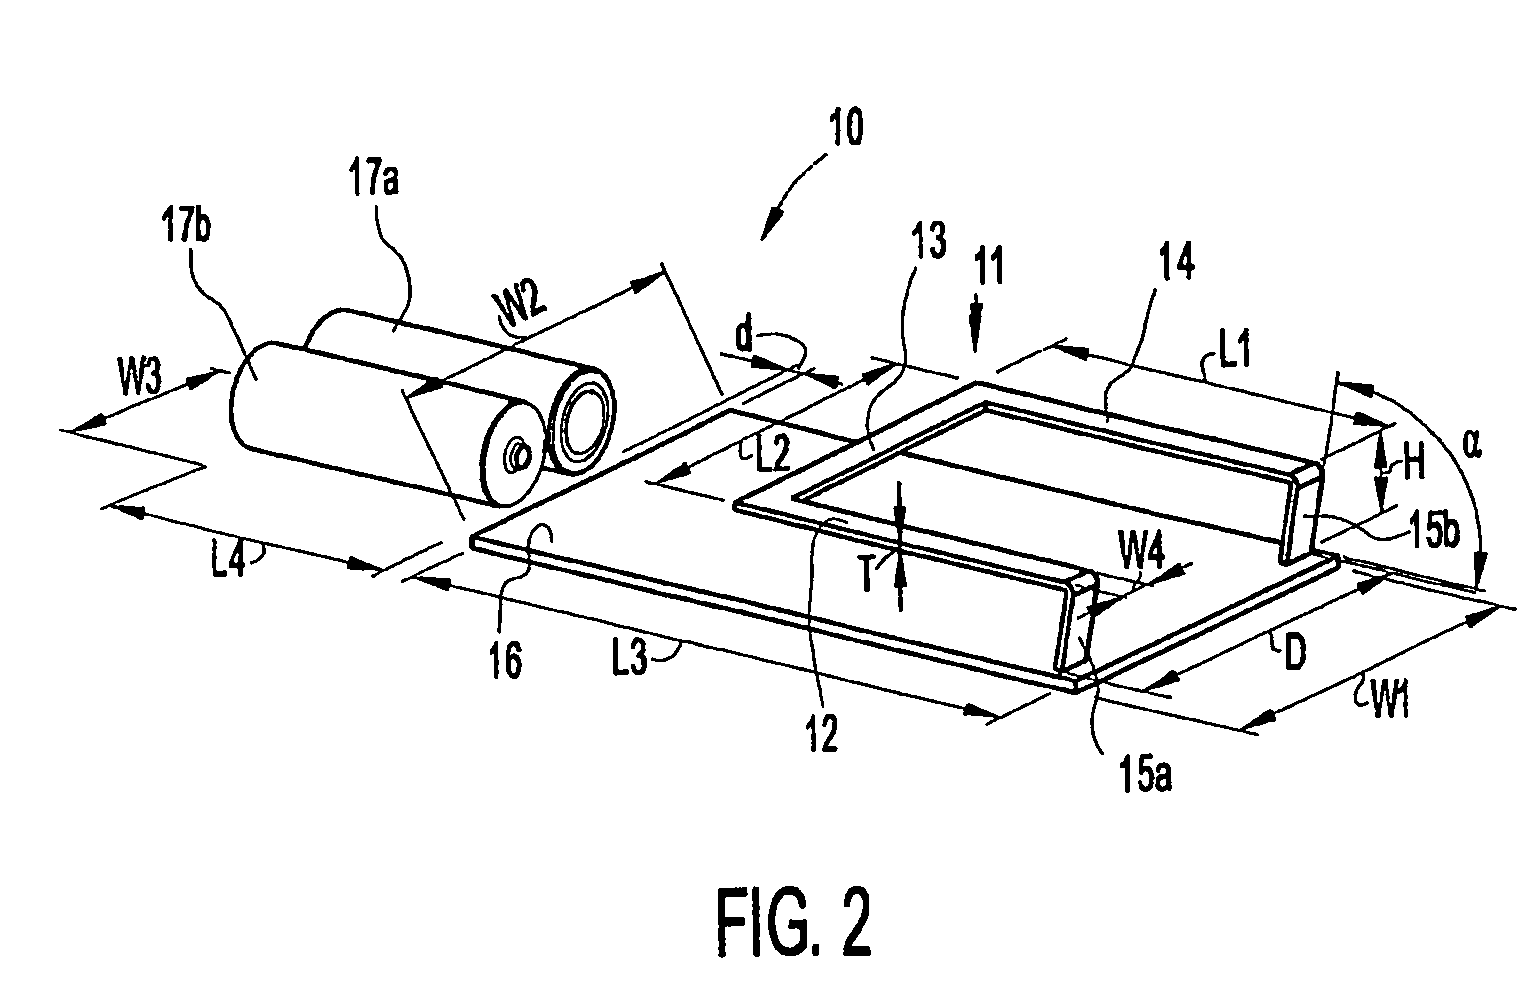 Wideband antenna device with extended ground plane in a portable device